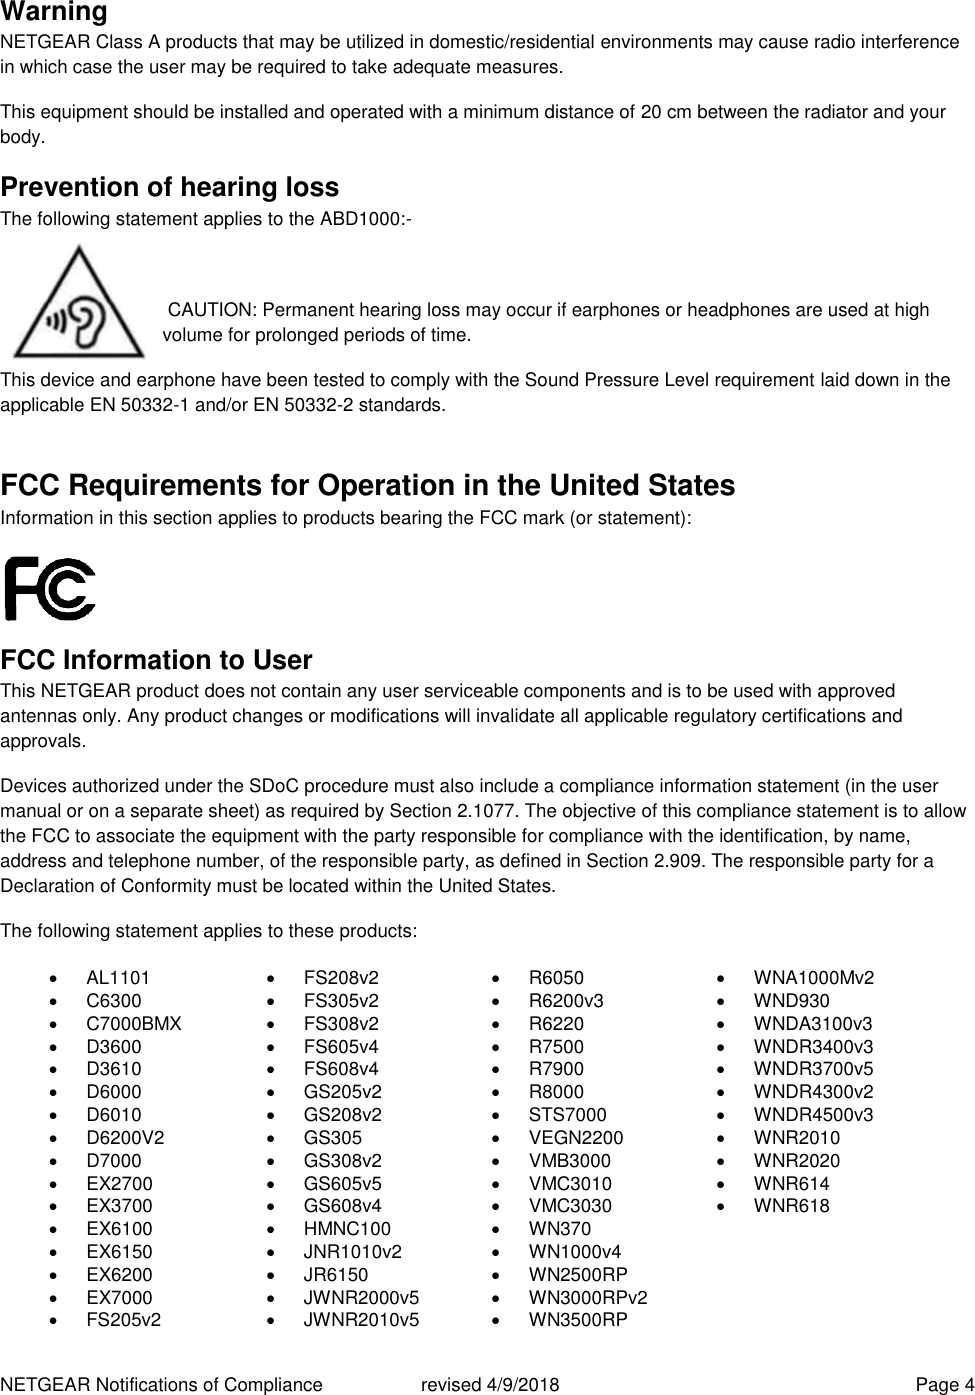 NETGEAR Notifications of Compliance    revised 4/9/2018  Page 4 Warning NETGEAR Class A products that may be utilized in domestic/residential environments may cause radio interference in which case the user may be required to take adequate measures.  This equipment should be installed and operated with a minimum distance of 20 cm between the radiator and your body. Prevention of hearing loss The following statement applies to the ABD1000:-   CAUTION: Permanent hearing loss may occur if earphones or headphones are used at high volume for prolonged periods of time. This device and earphone have been tested to comply with the Sound Pressure Level requirement laid down in the applicable EN 50332-1 and/or EN 50332-2 standards. FCC Requirements for Operation in the United States Information in this section applies to products bearing the FCC mark (or statement):   FCC Information to User This NETGEAR product does not contain any user serviceable components and is to be used with approved antennas only. Any product changes or modifications will invalidate all applicable regulatory certifications and approvals. Devices authorized under the SDoC procedure must also include a compliance information statement (in the user manual or on a separate sheet) as required by Section 2.1077. The objective of this compliance statement is to allow the FCC to associate the equipment with the party responsible for compliance with the identification, by name, address and telephone number, of the responsible party, as defined in Section 2.909. The responsible party for a Declaration of Conformity must be located within the United States. The following statement applies to these products:   AL1101   FS208v2   R6050   WNA1000Mv2   C6300   FS305v2   R6200v3   WND930   C7000BMX   FS308v2   R6220  WNDA3100v3   D3600   FS605v4   R7500   WNDR3400v3   D3610   FS608v4   R7900   WNDR3700v5   D6000   GS205v2   R8000   WNDR4300v2   D6010   GS208v2   STS7000   WNDR4500v3   D6200V2   GS305   VEGN2200   WNR2010   D7000   GS308v2   VMB3000   WNR2020  EX2700   GS605v5   VMC3010   WNR614   EX3700   GS608v4   VMC3030   WNR618   EX6100   HMNC100   WN370   EX6150   JNR1010v2  WN1000v4   EX6200   JR6150   WN2500RP   EX7000   JWNR2000v5   WN3000RPv2   FS205v2   JWNR2010v5   WN3500RP 